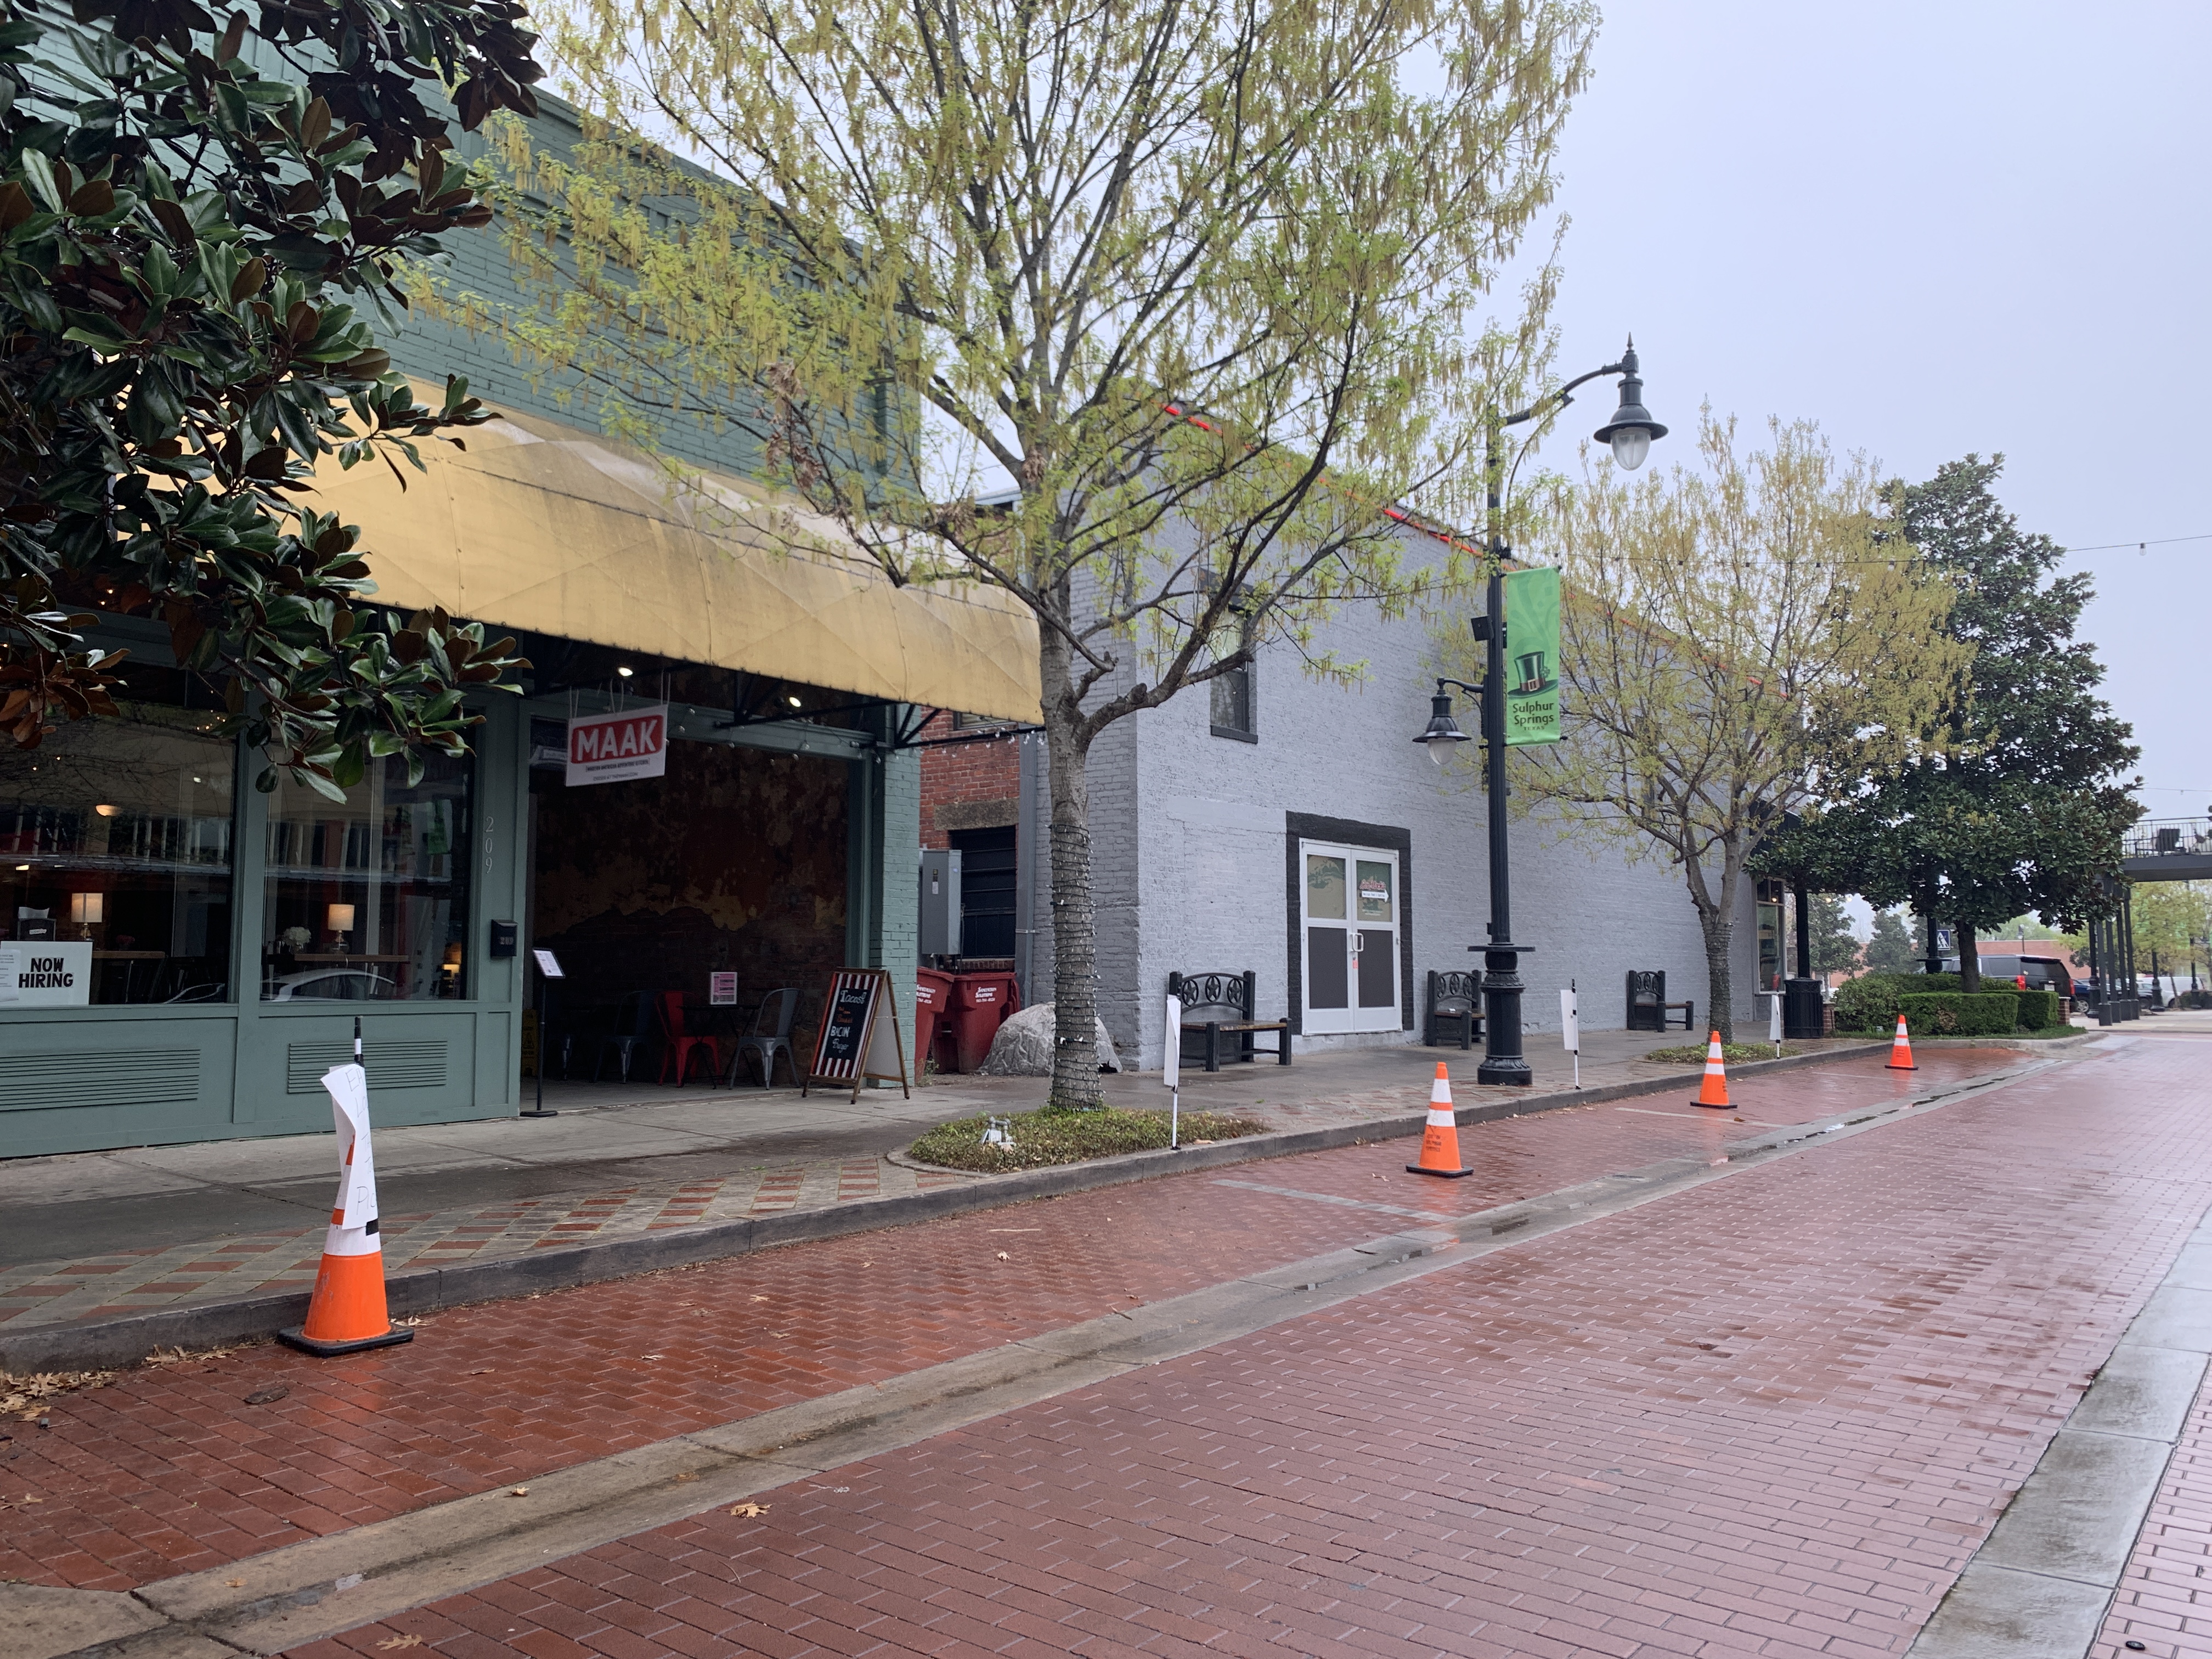 City of SS Designates Four Parking Spots for Curbside Pick-Up from Four Downtown Restaurants